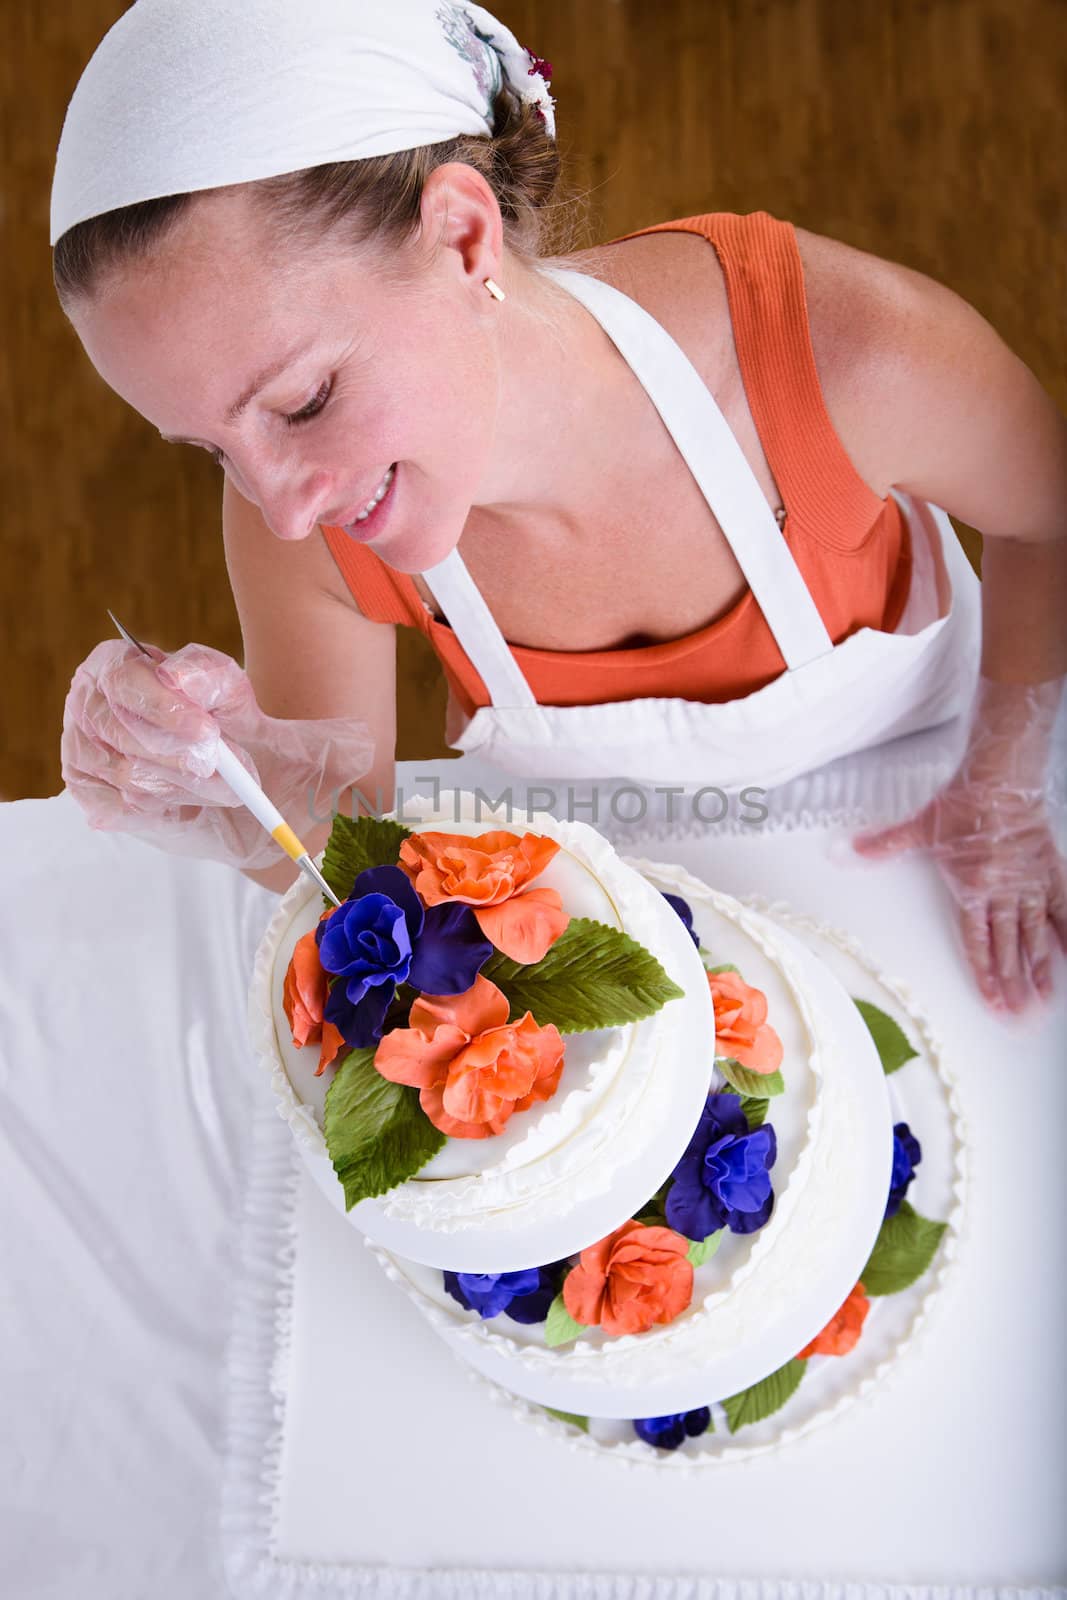 Woman with white bandanna giving to a wedding cake latest small retouches with love, shot from above